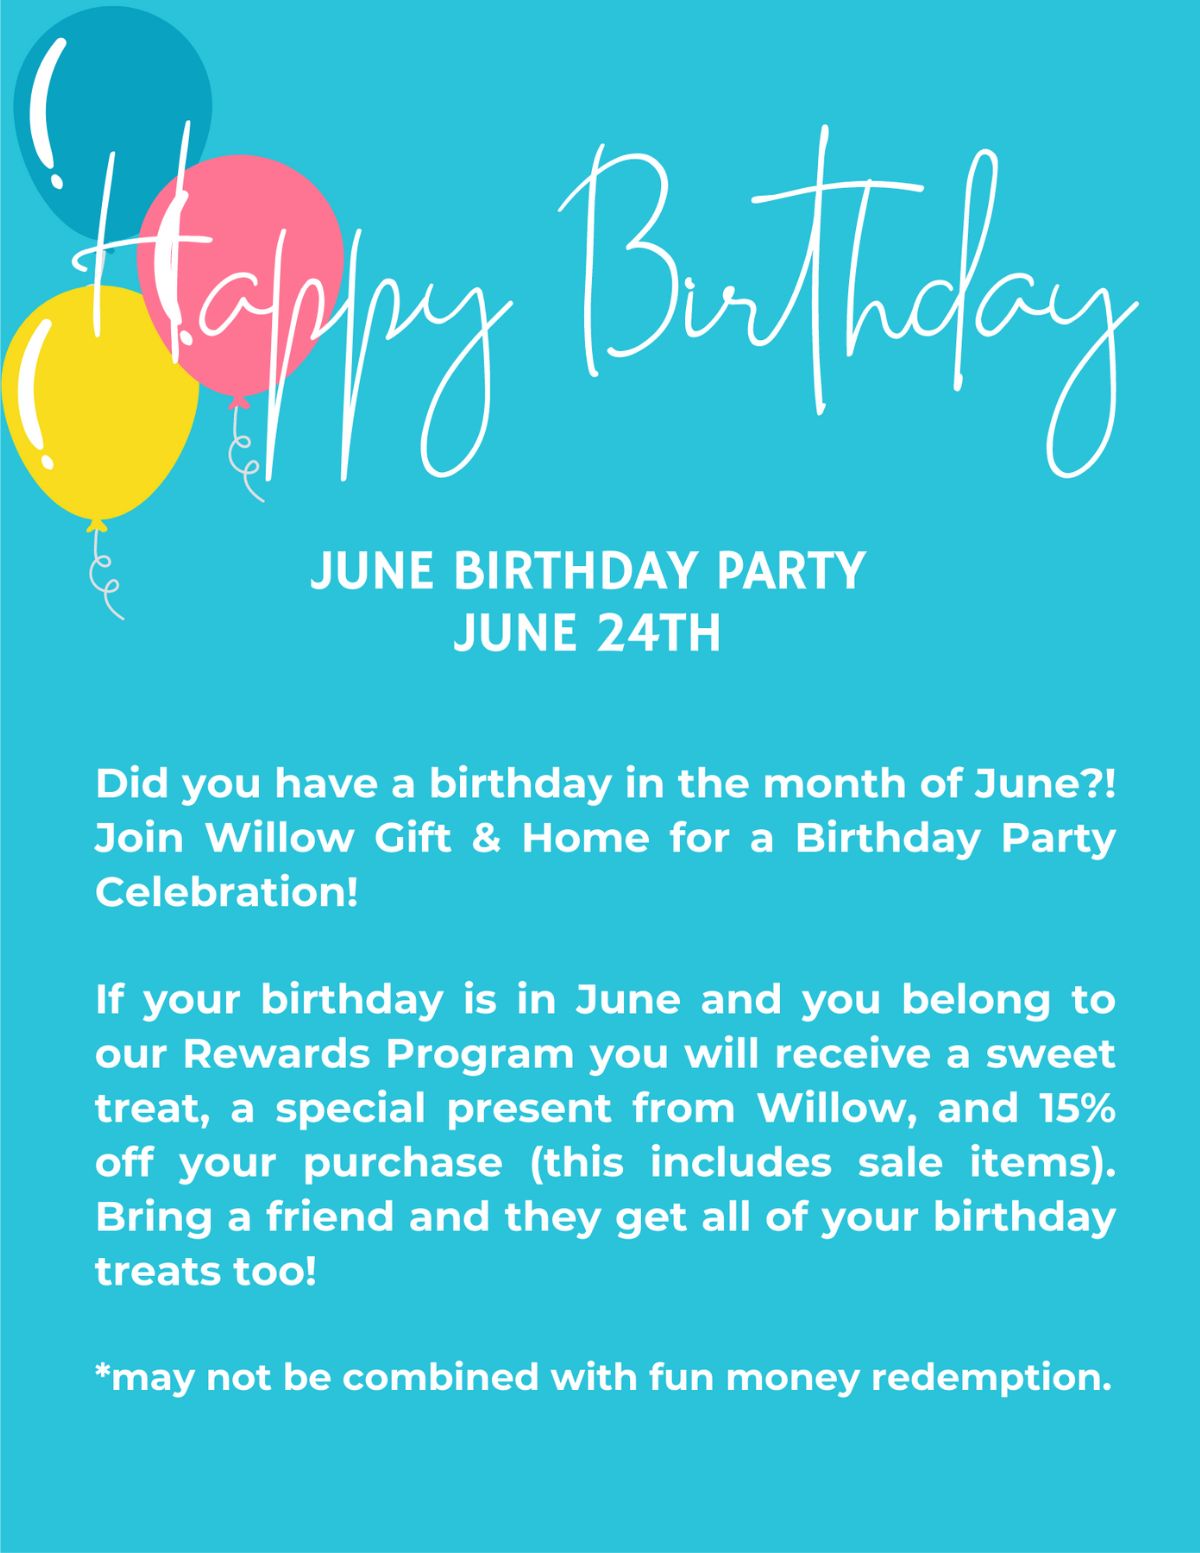 Birthday Party at Willow Gift & Home